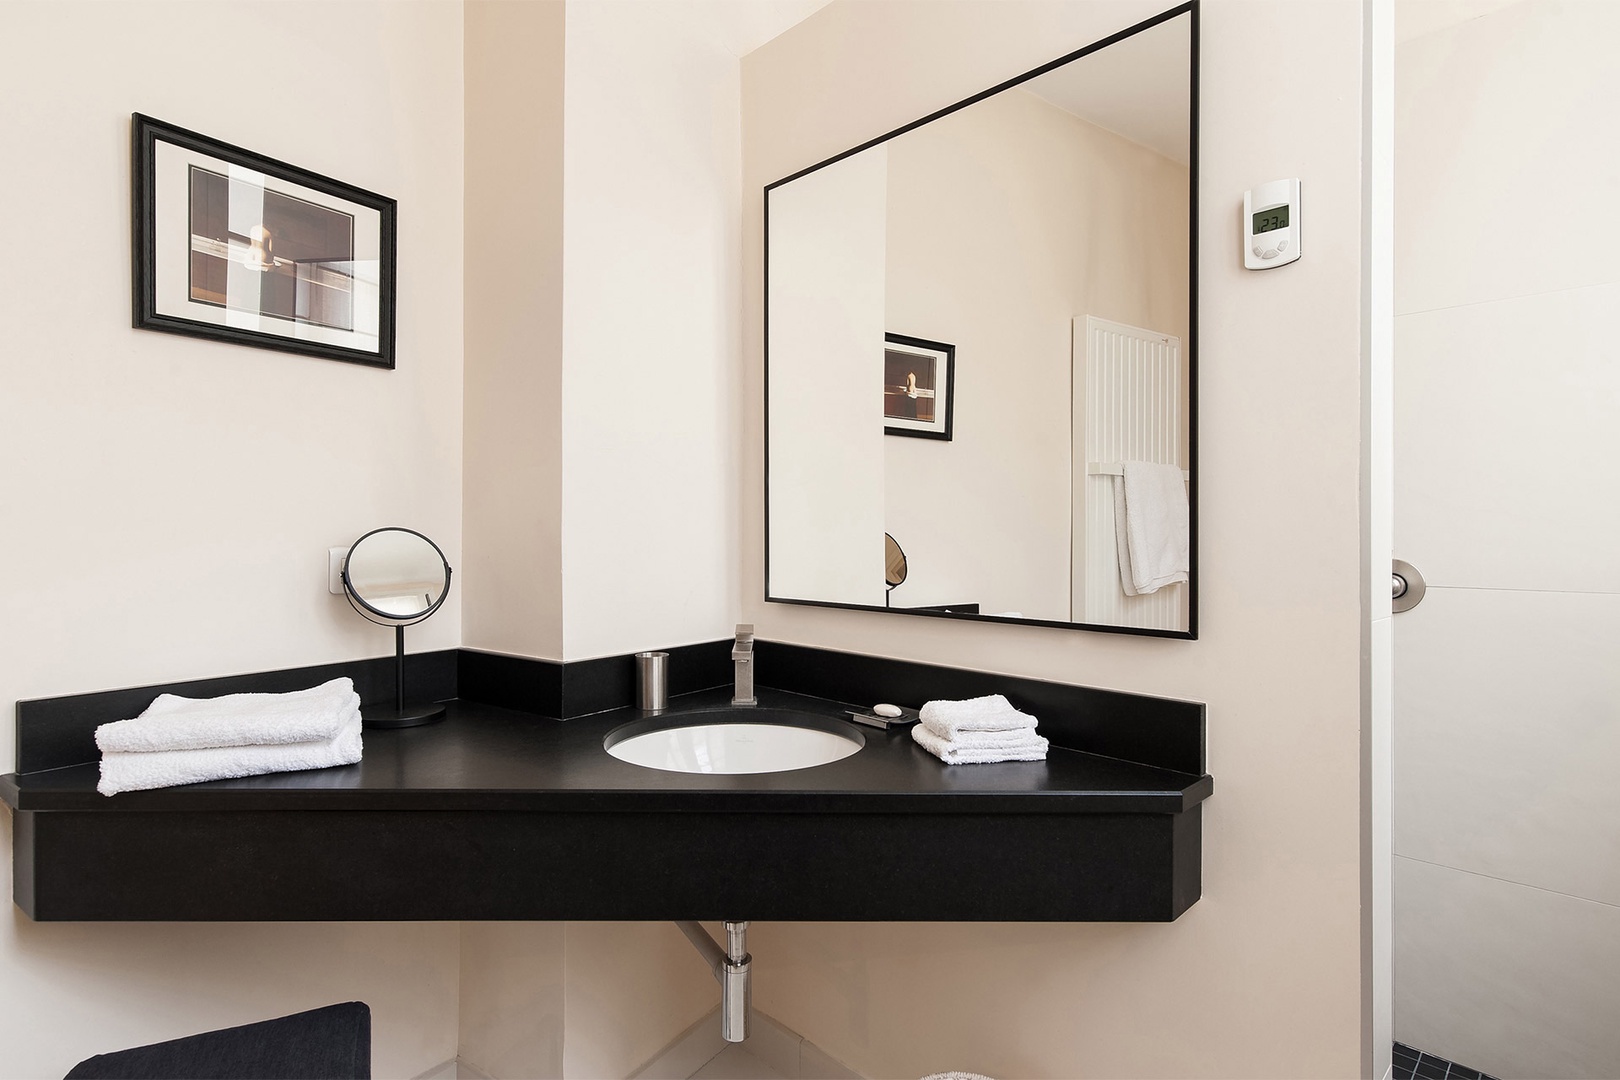 Enjoy the high-end finishes in the bathroom.